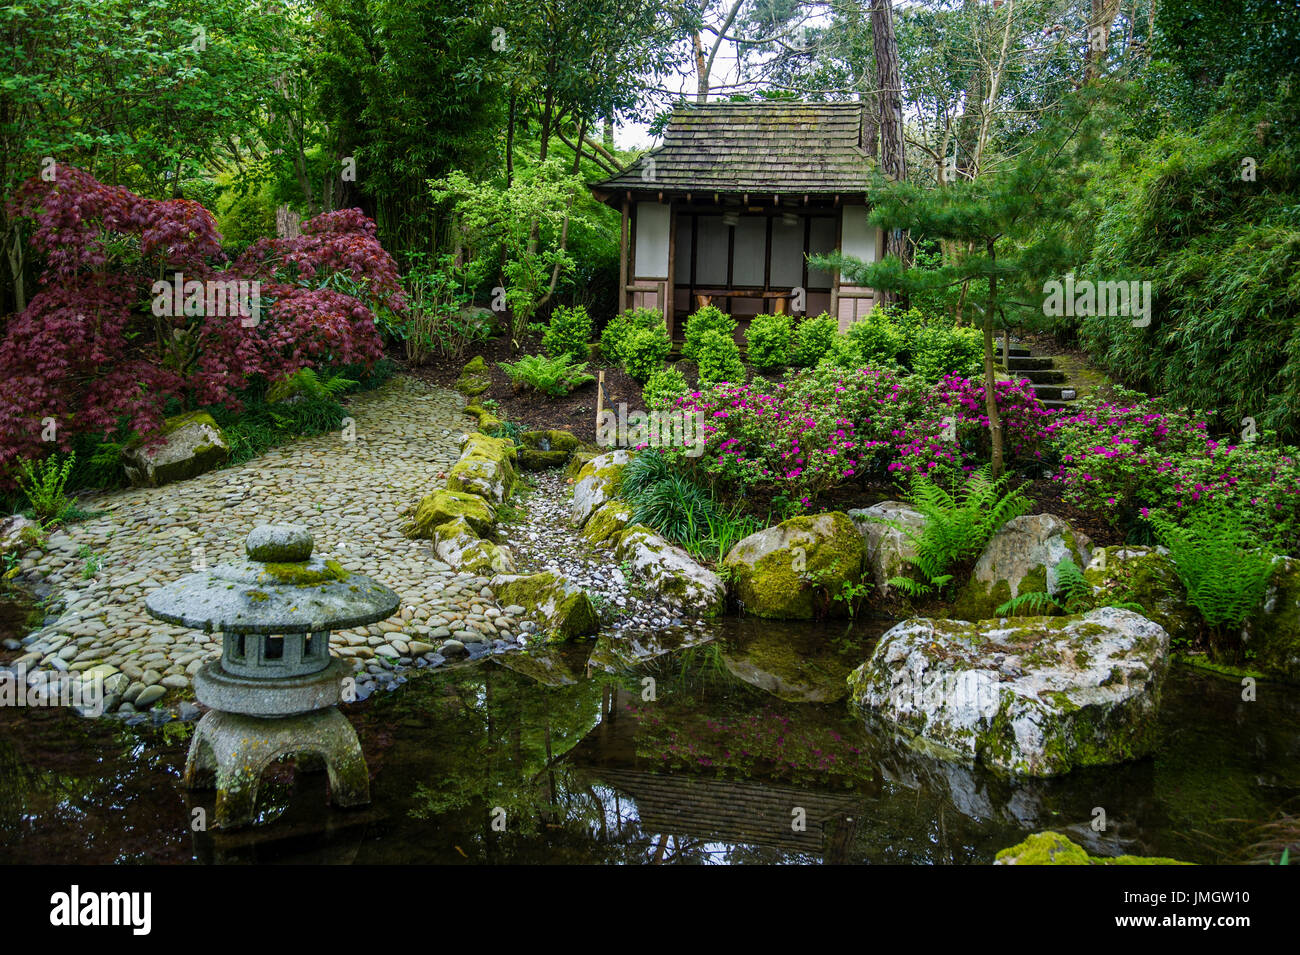 The summer house in the Japanese garden at Pinetum Park and Pine Lodge Gadens Stock Photo